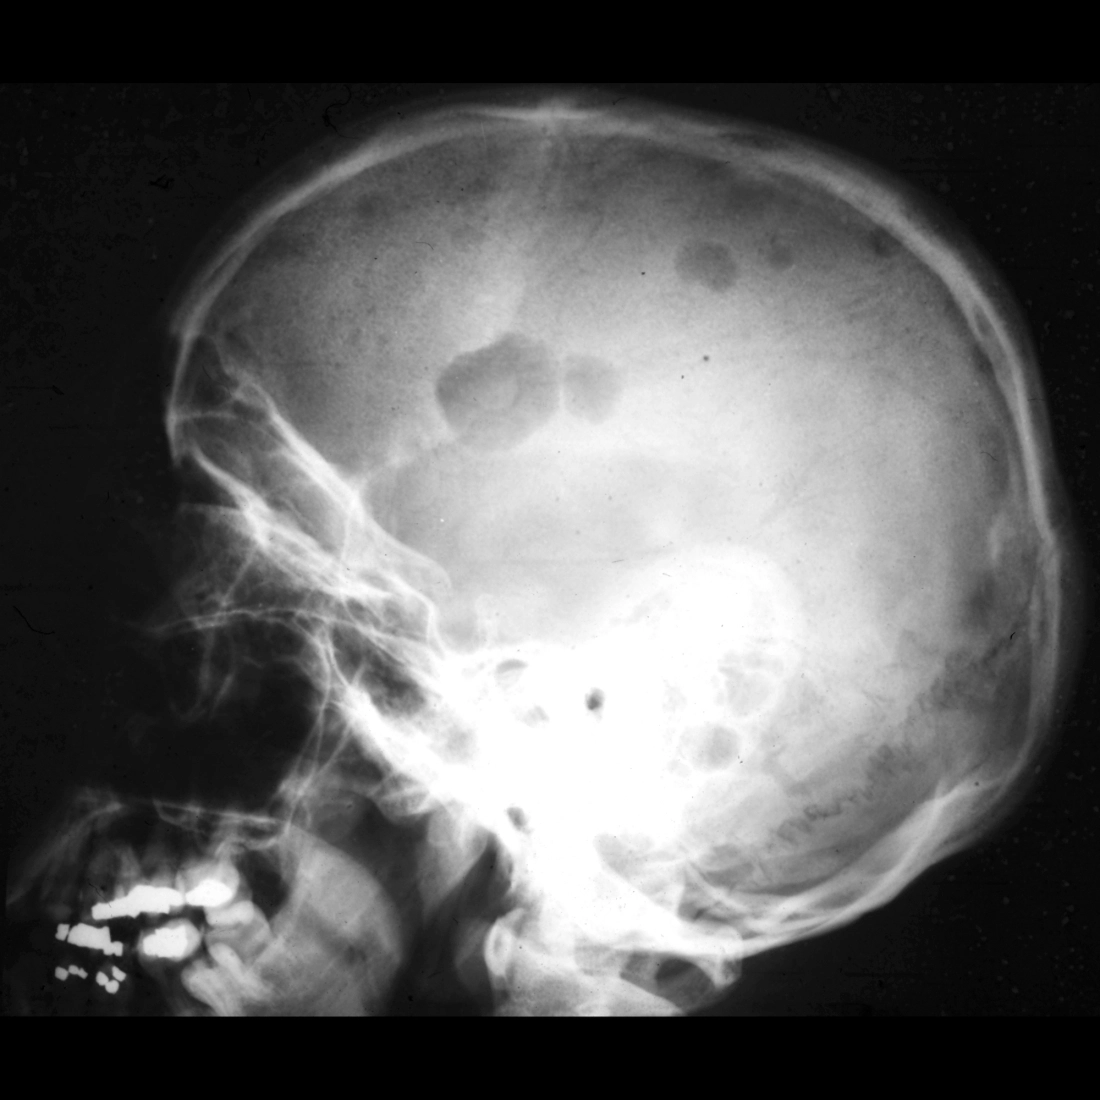 Radiograph of multiple myeloma of skull